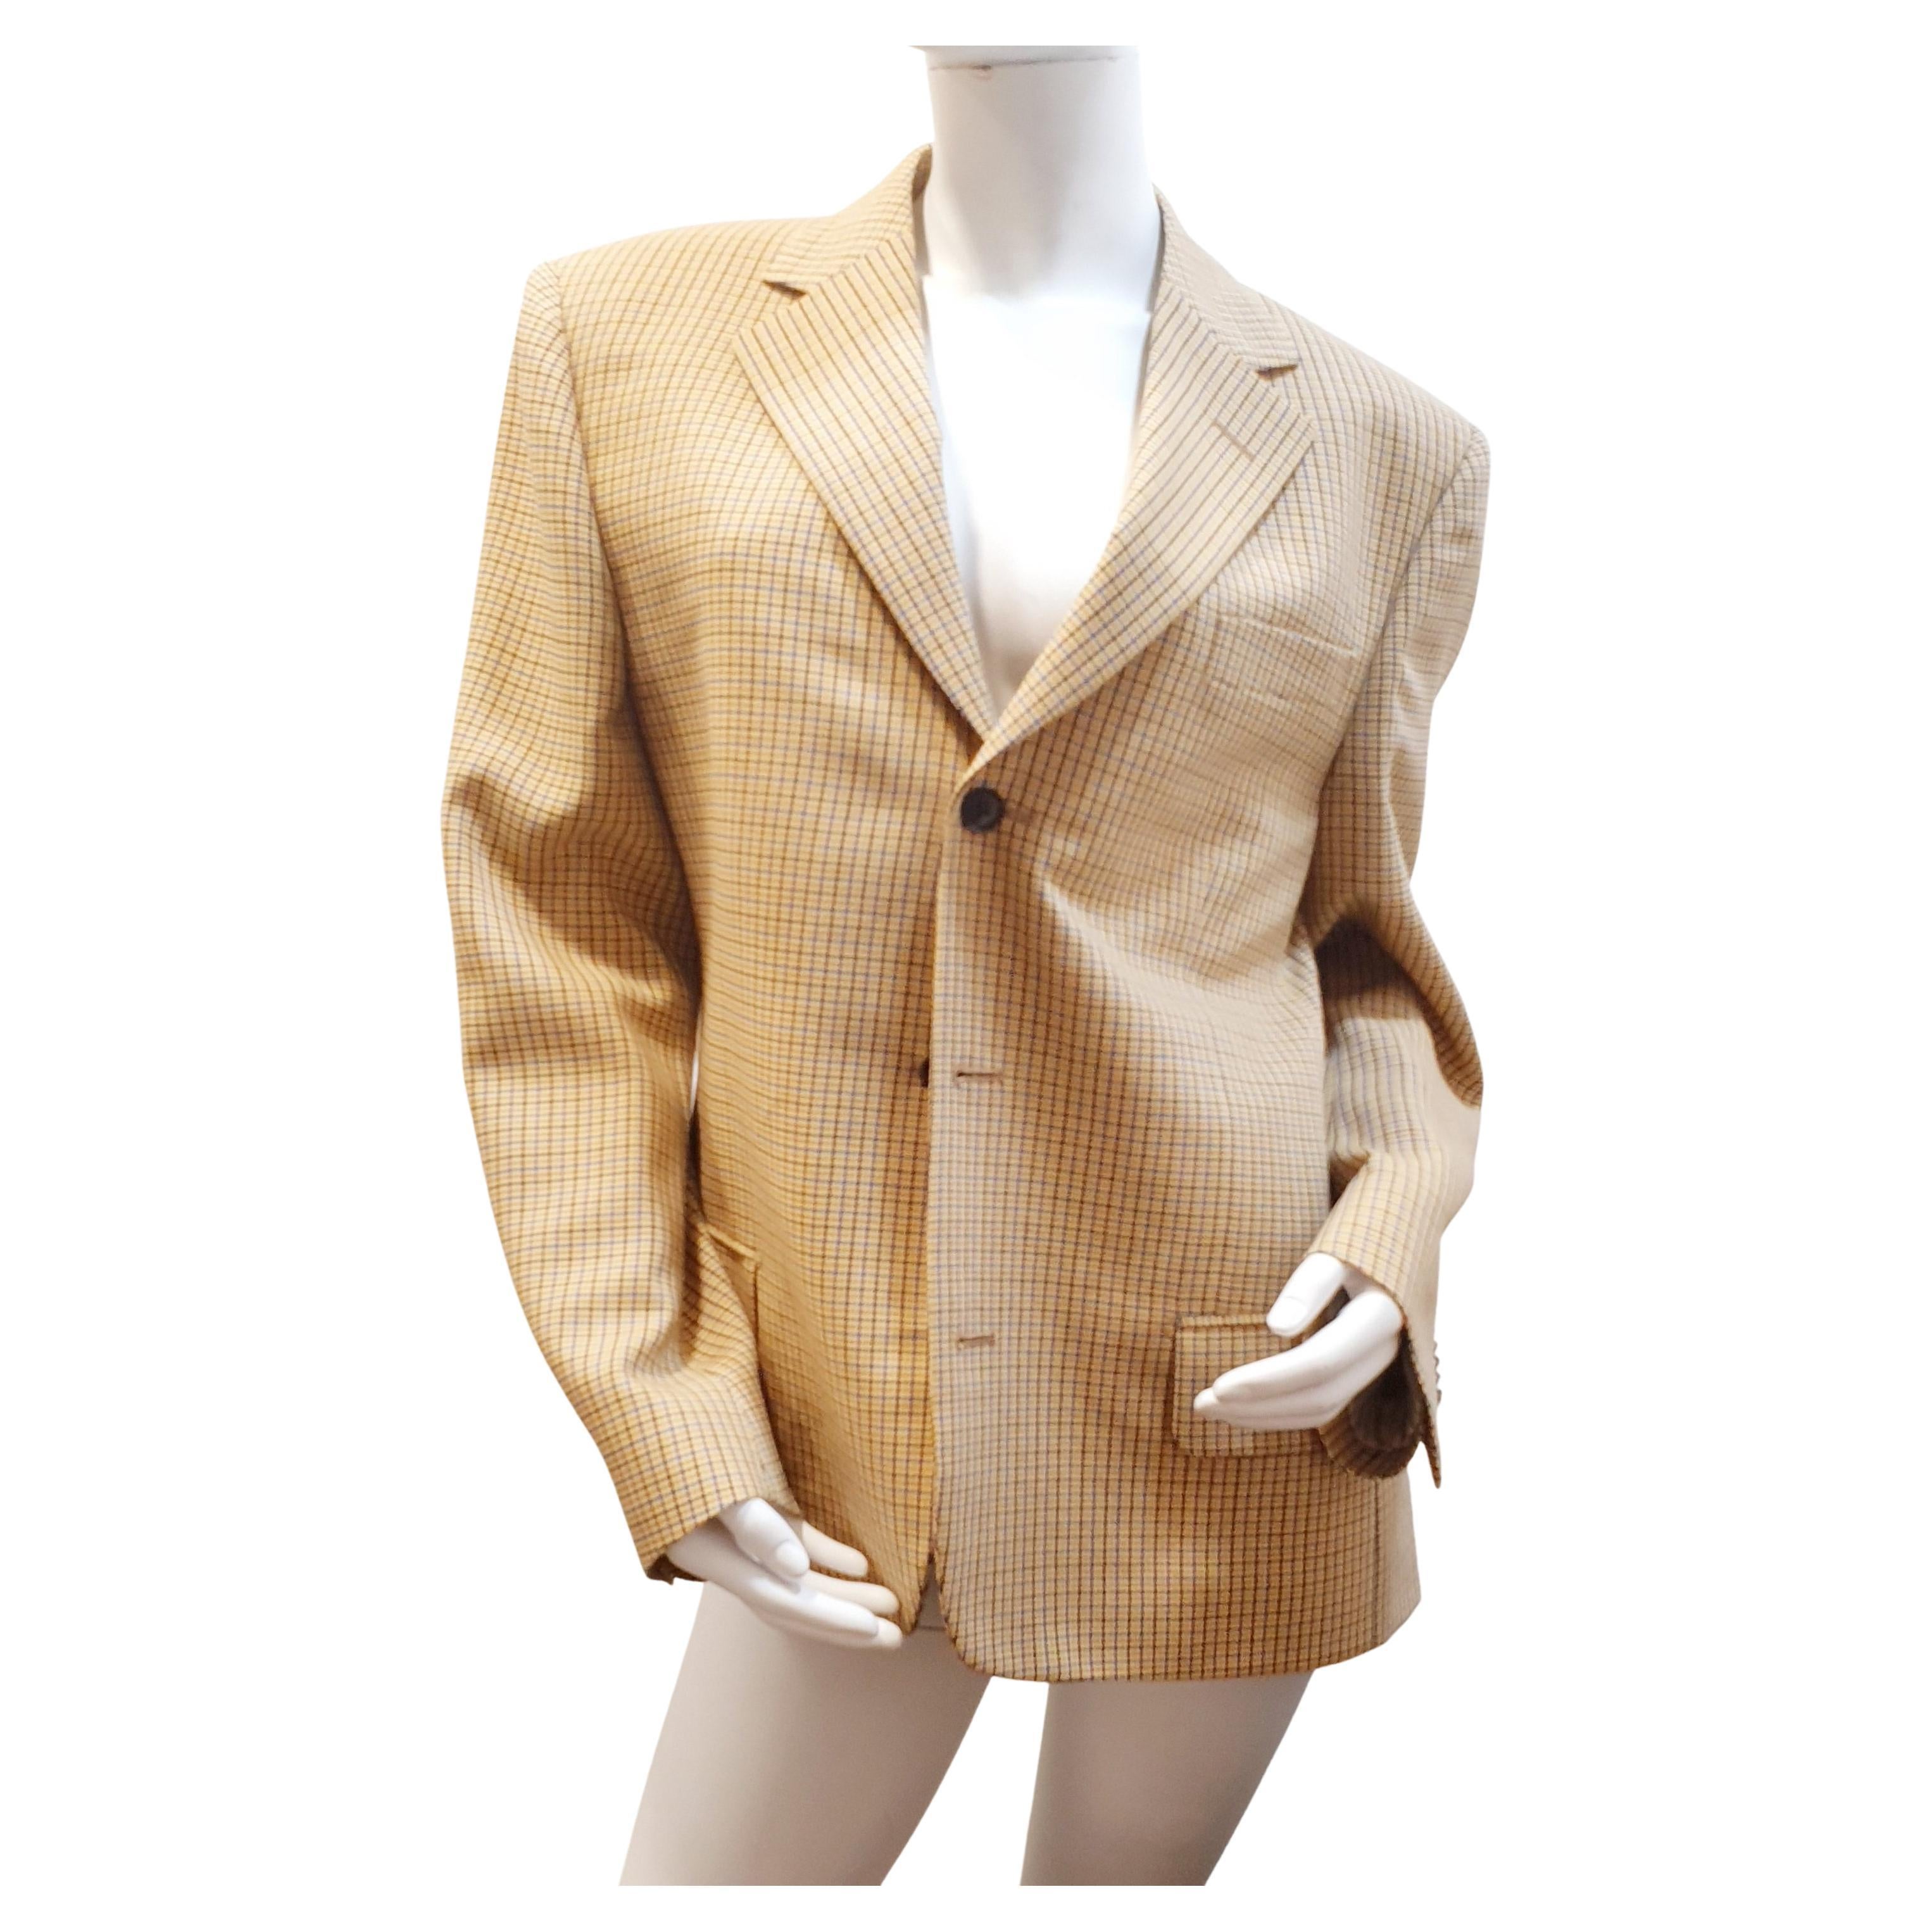 Smith & Smith Men's Checked Blazer  from the Black & Blue collection For Sale